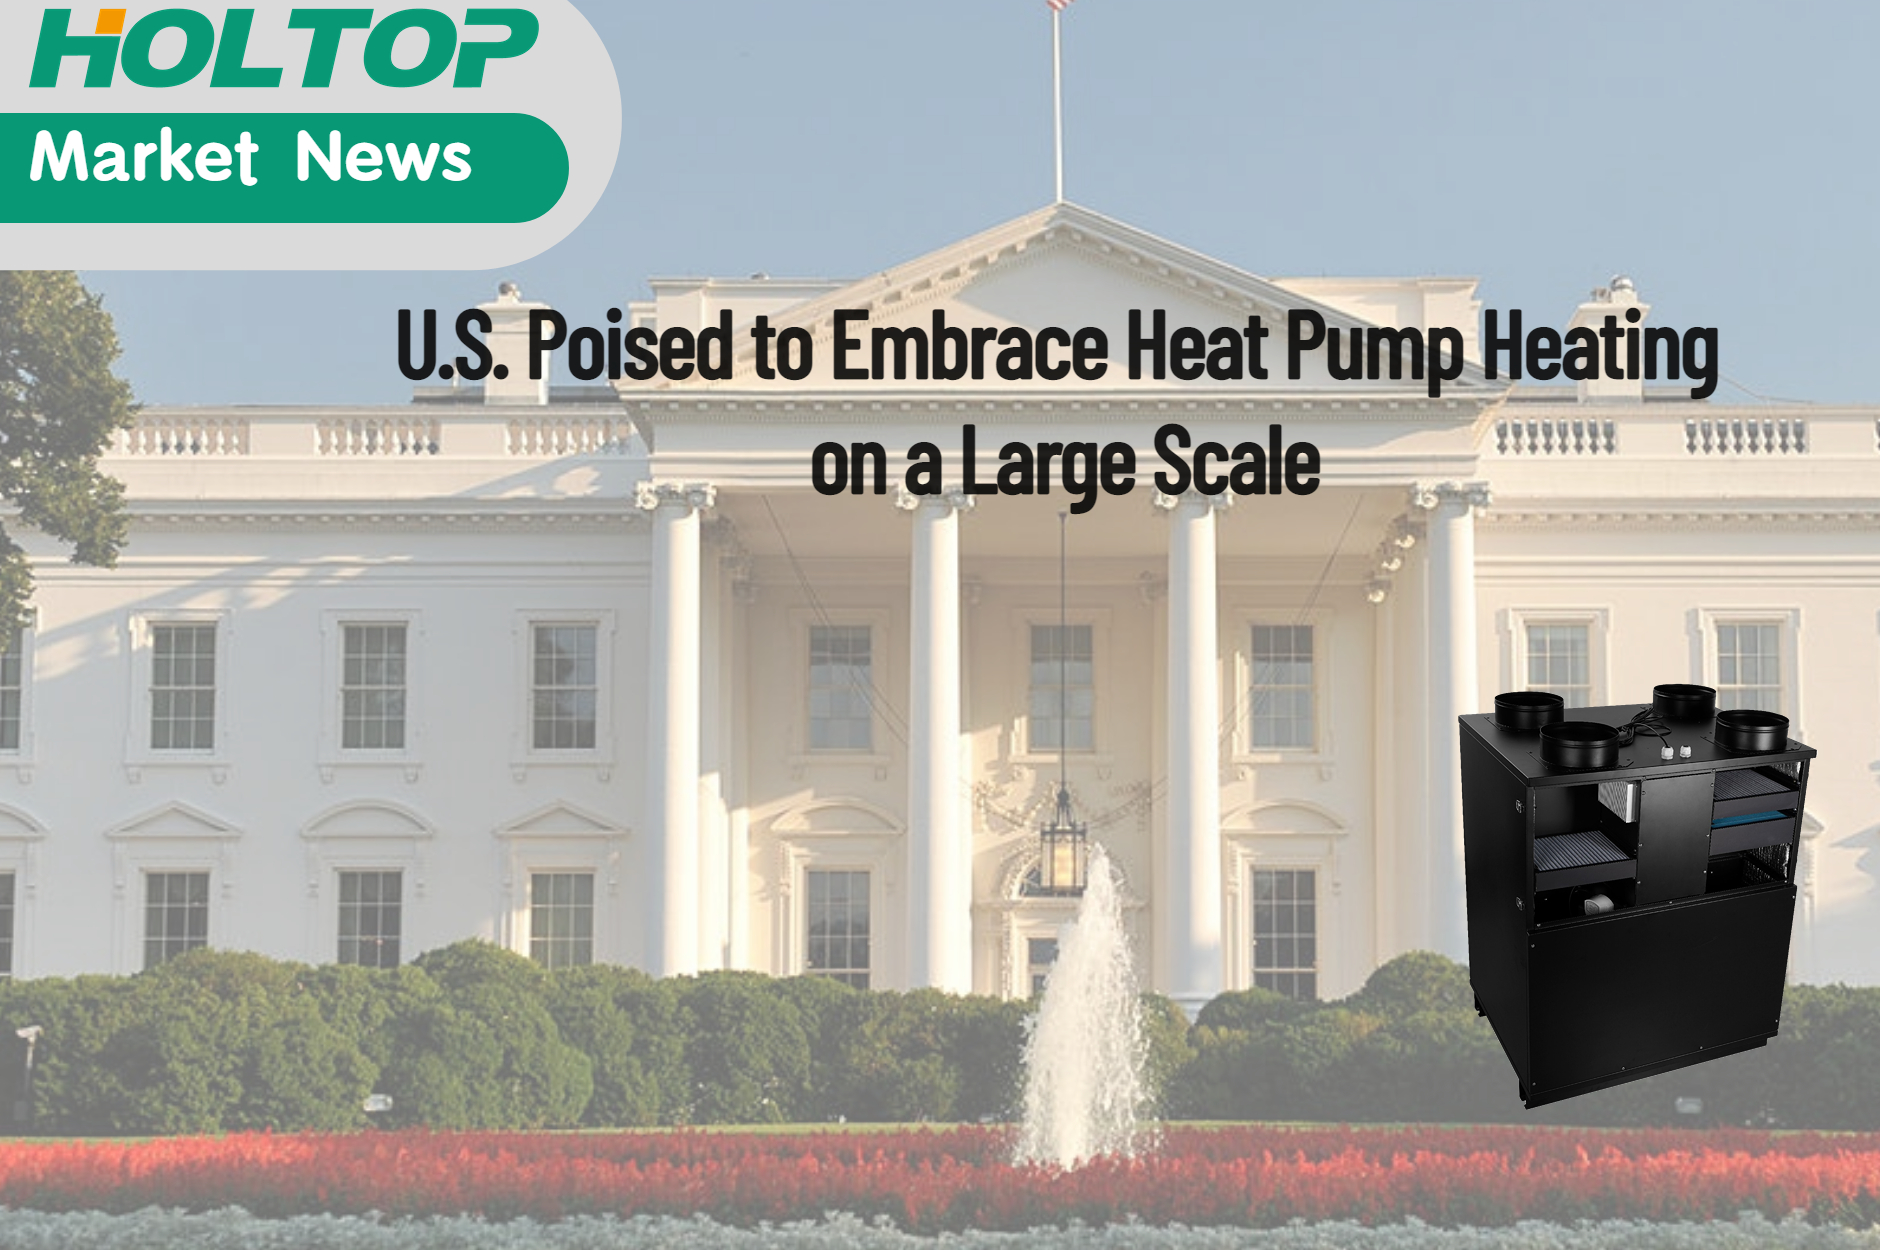 U.S. Poised to Embrace Heat Pump Heating on a Large Scale